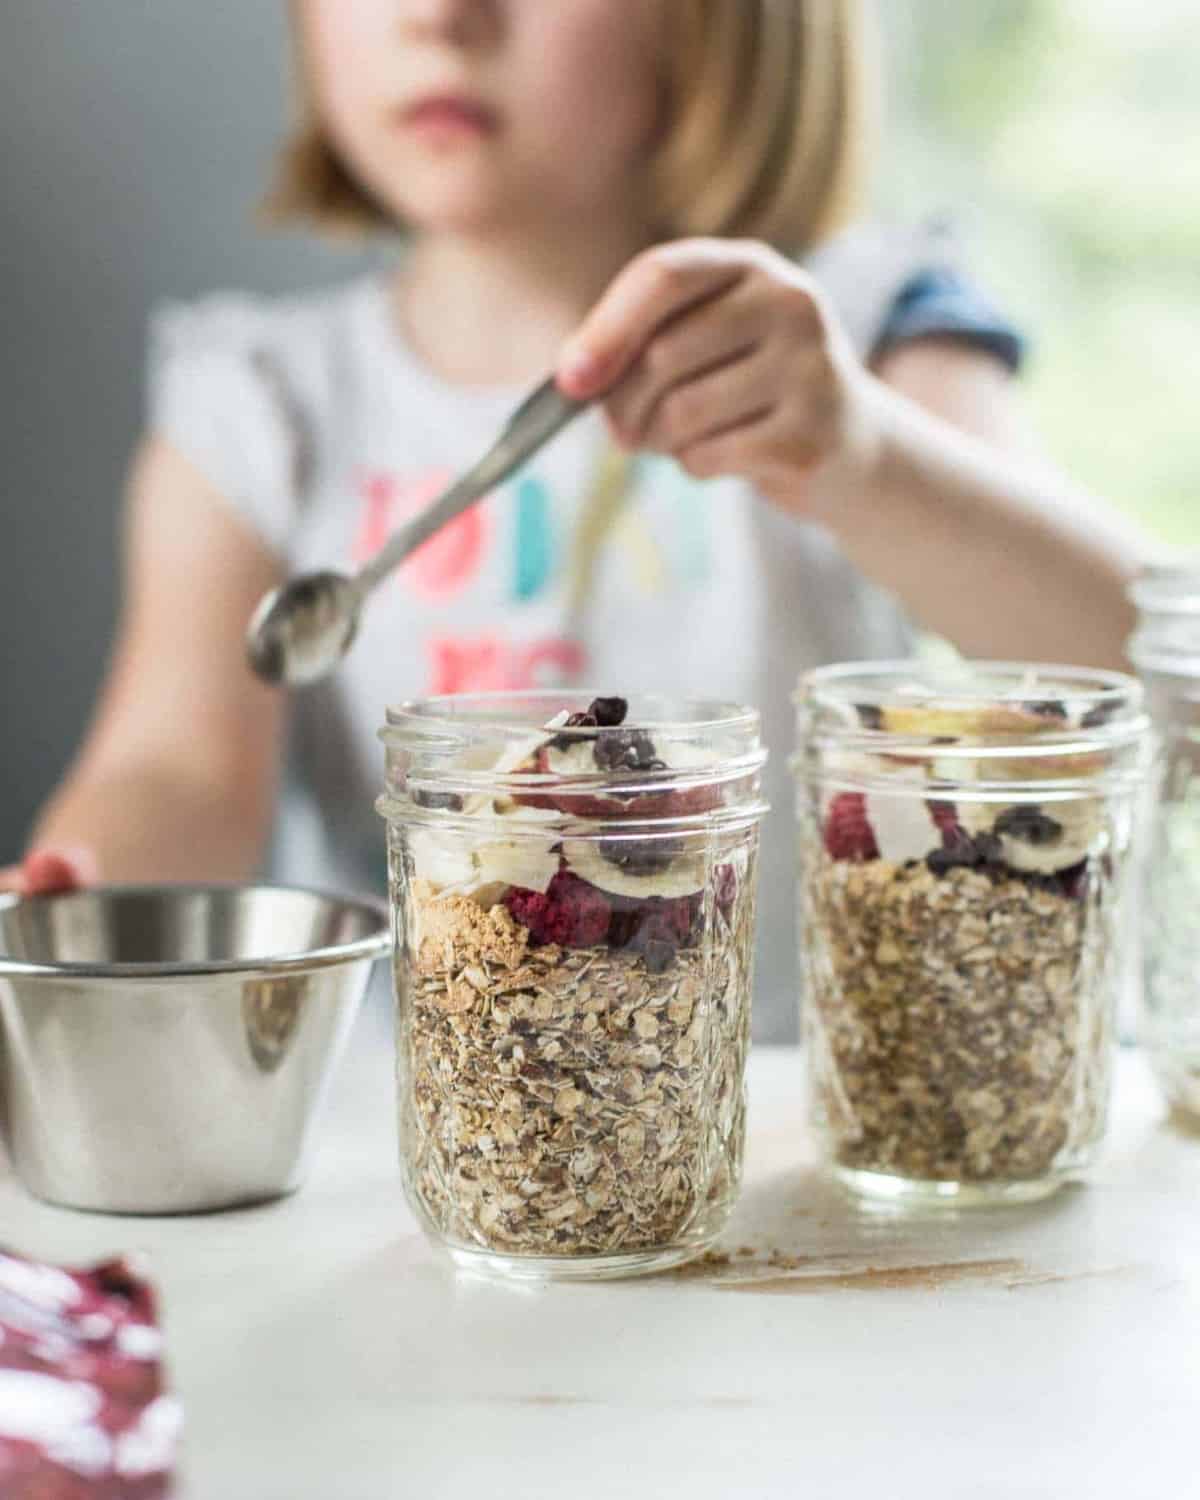 adding toppings to oatmeal in small glass jars